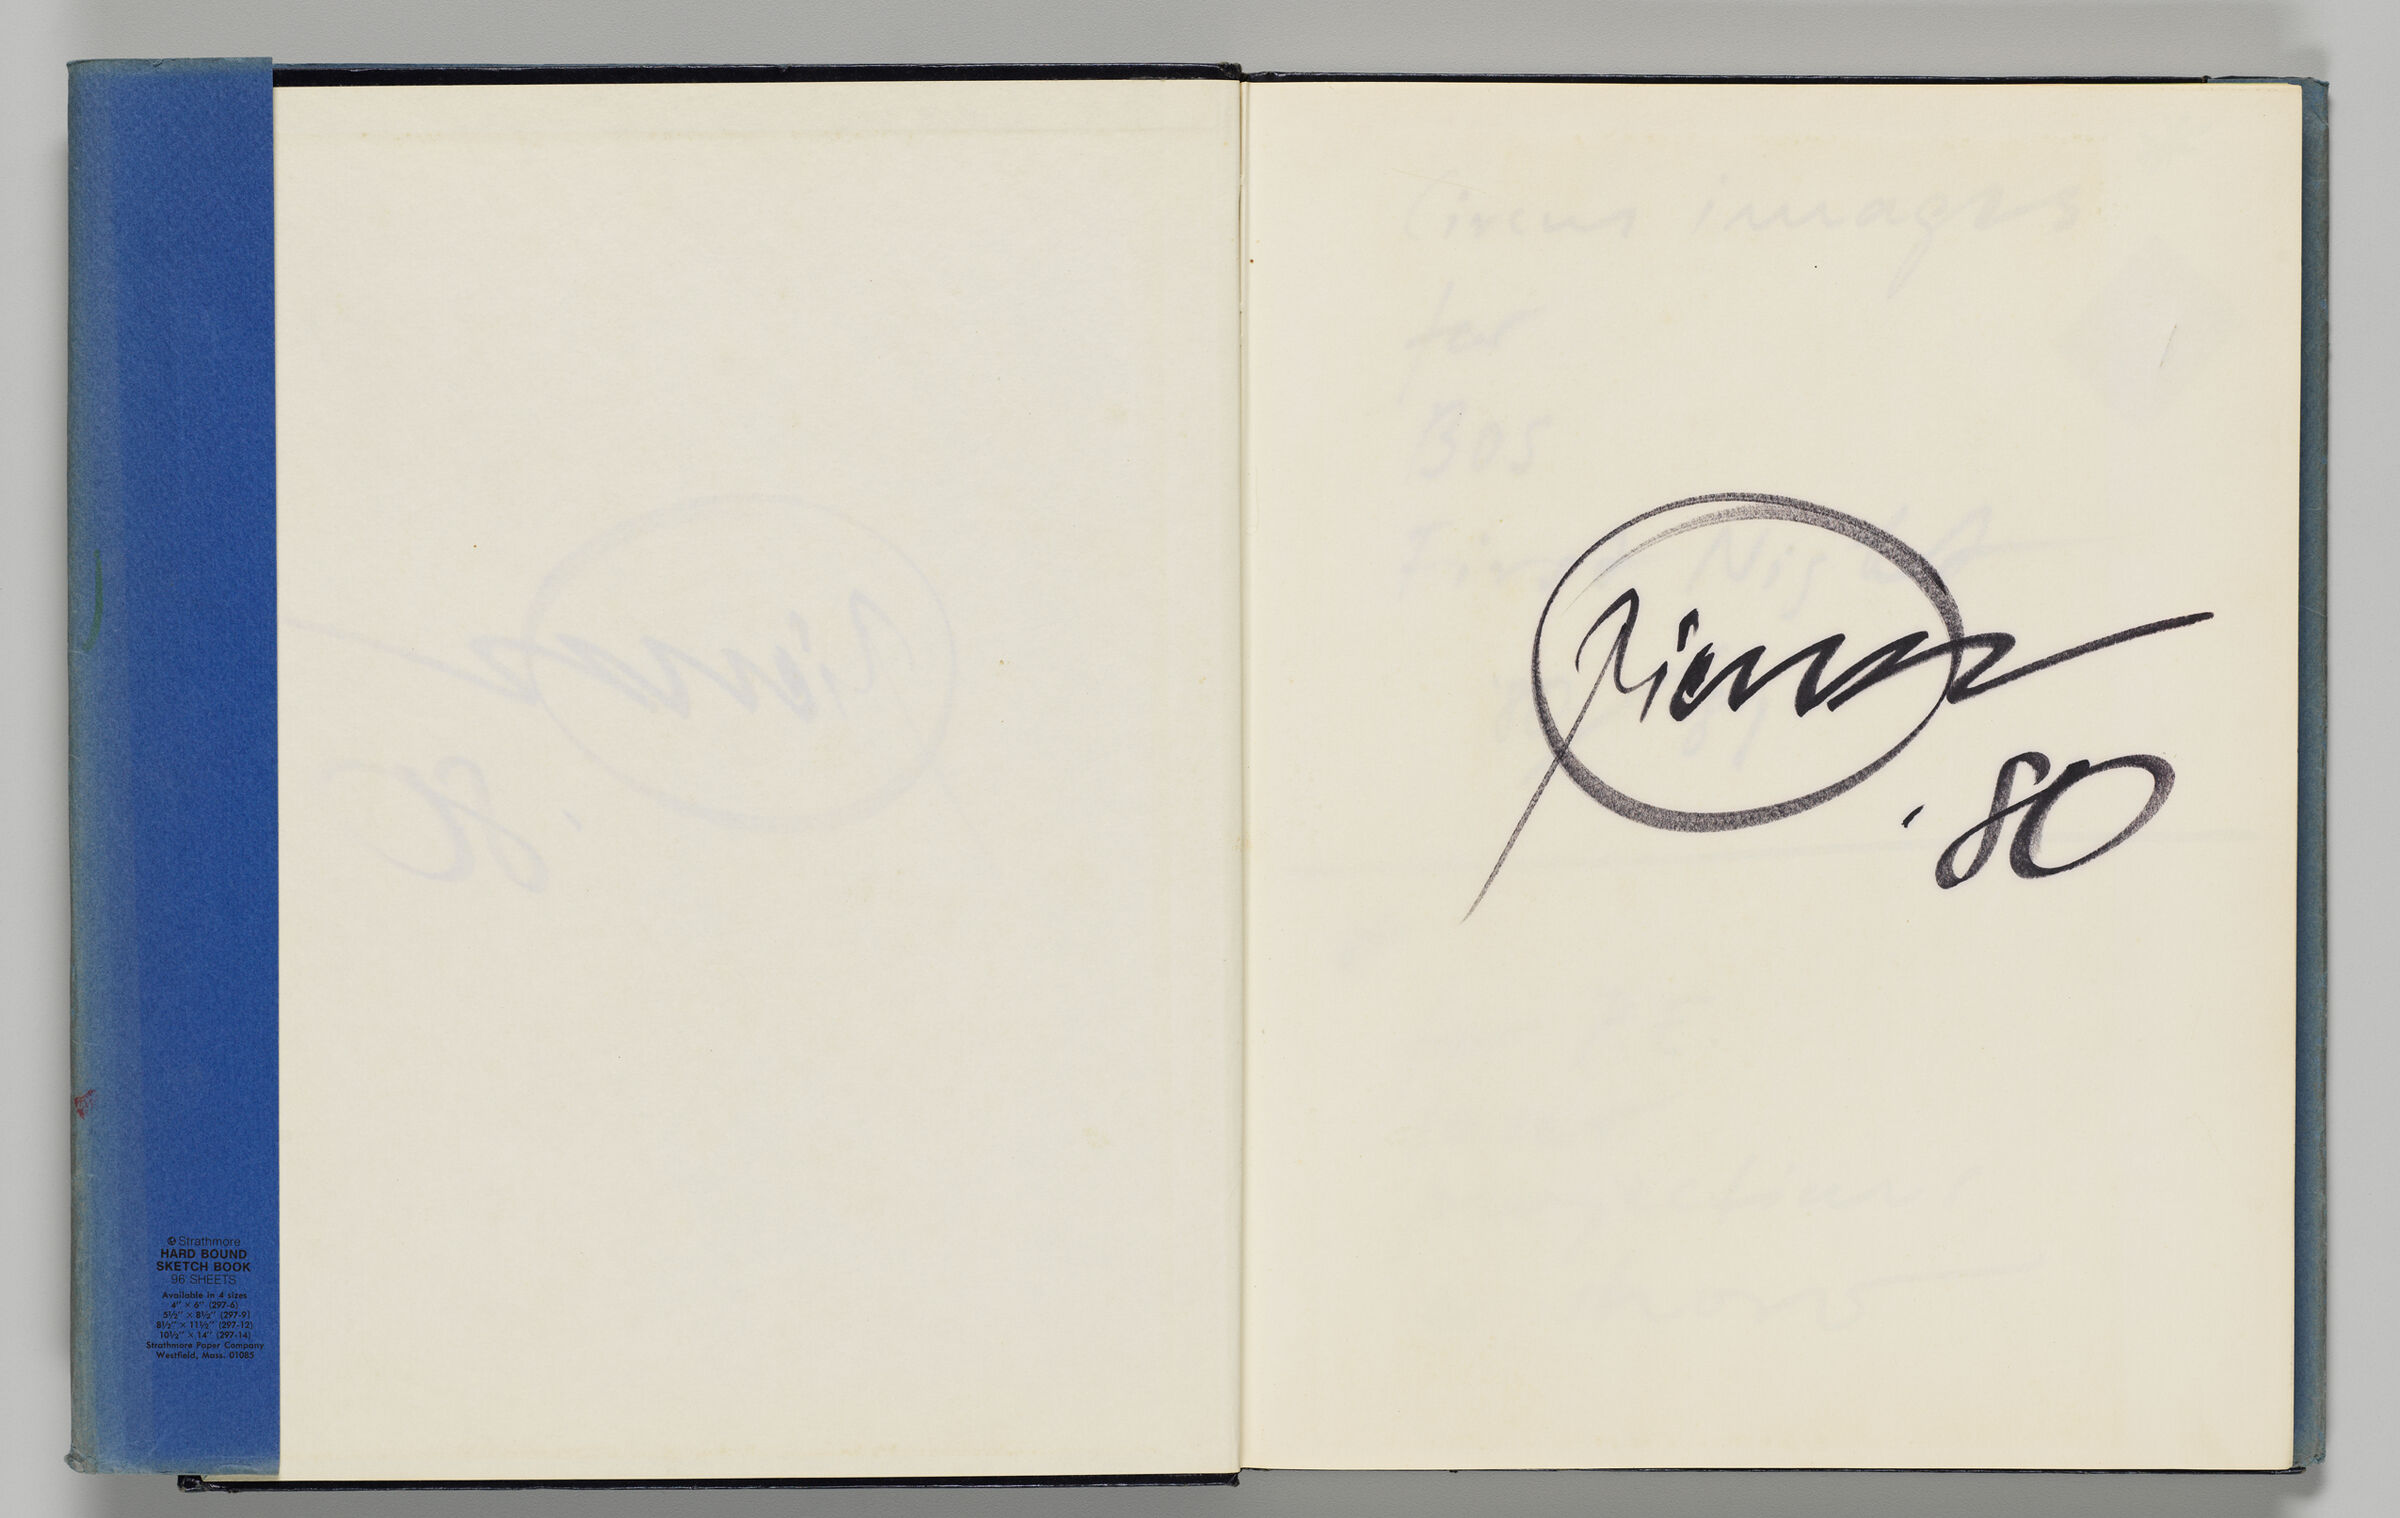 Untitled (Marker Transfer, Left Page); Untitled (Signature, Right Page)